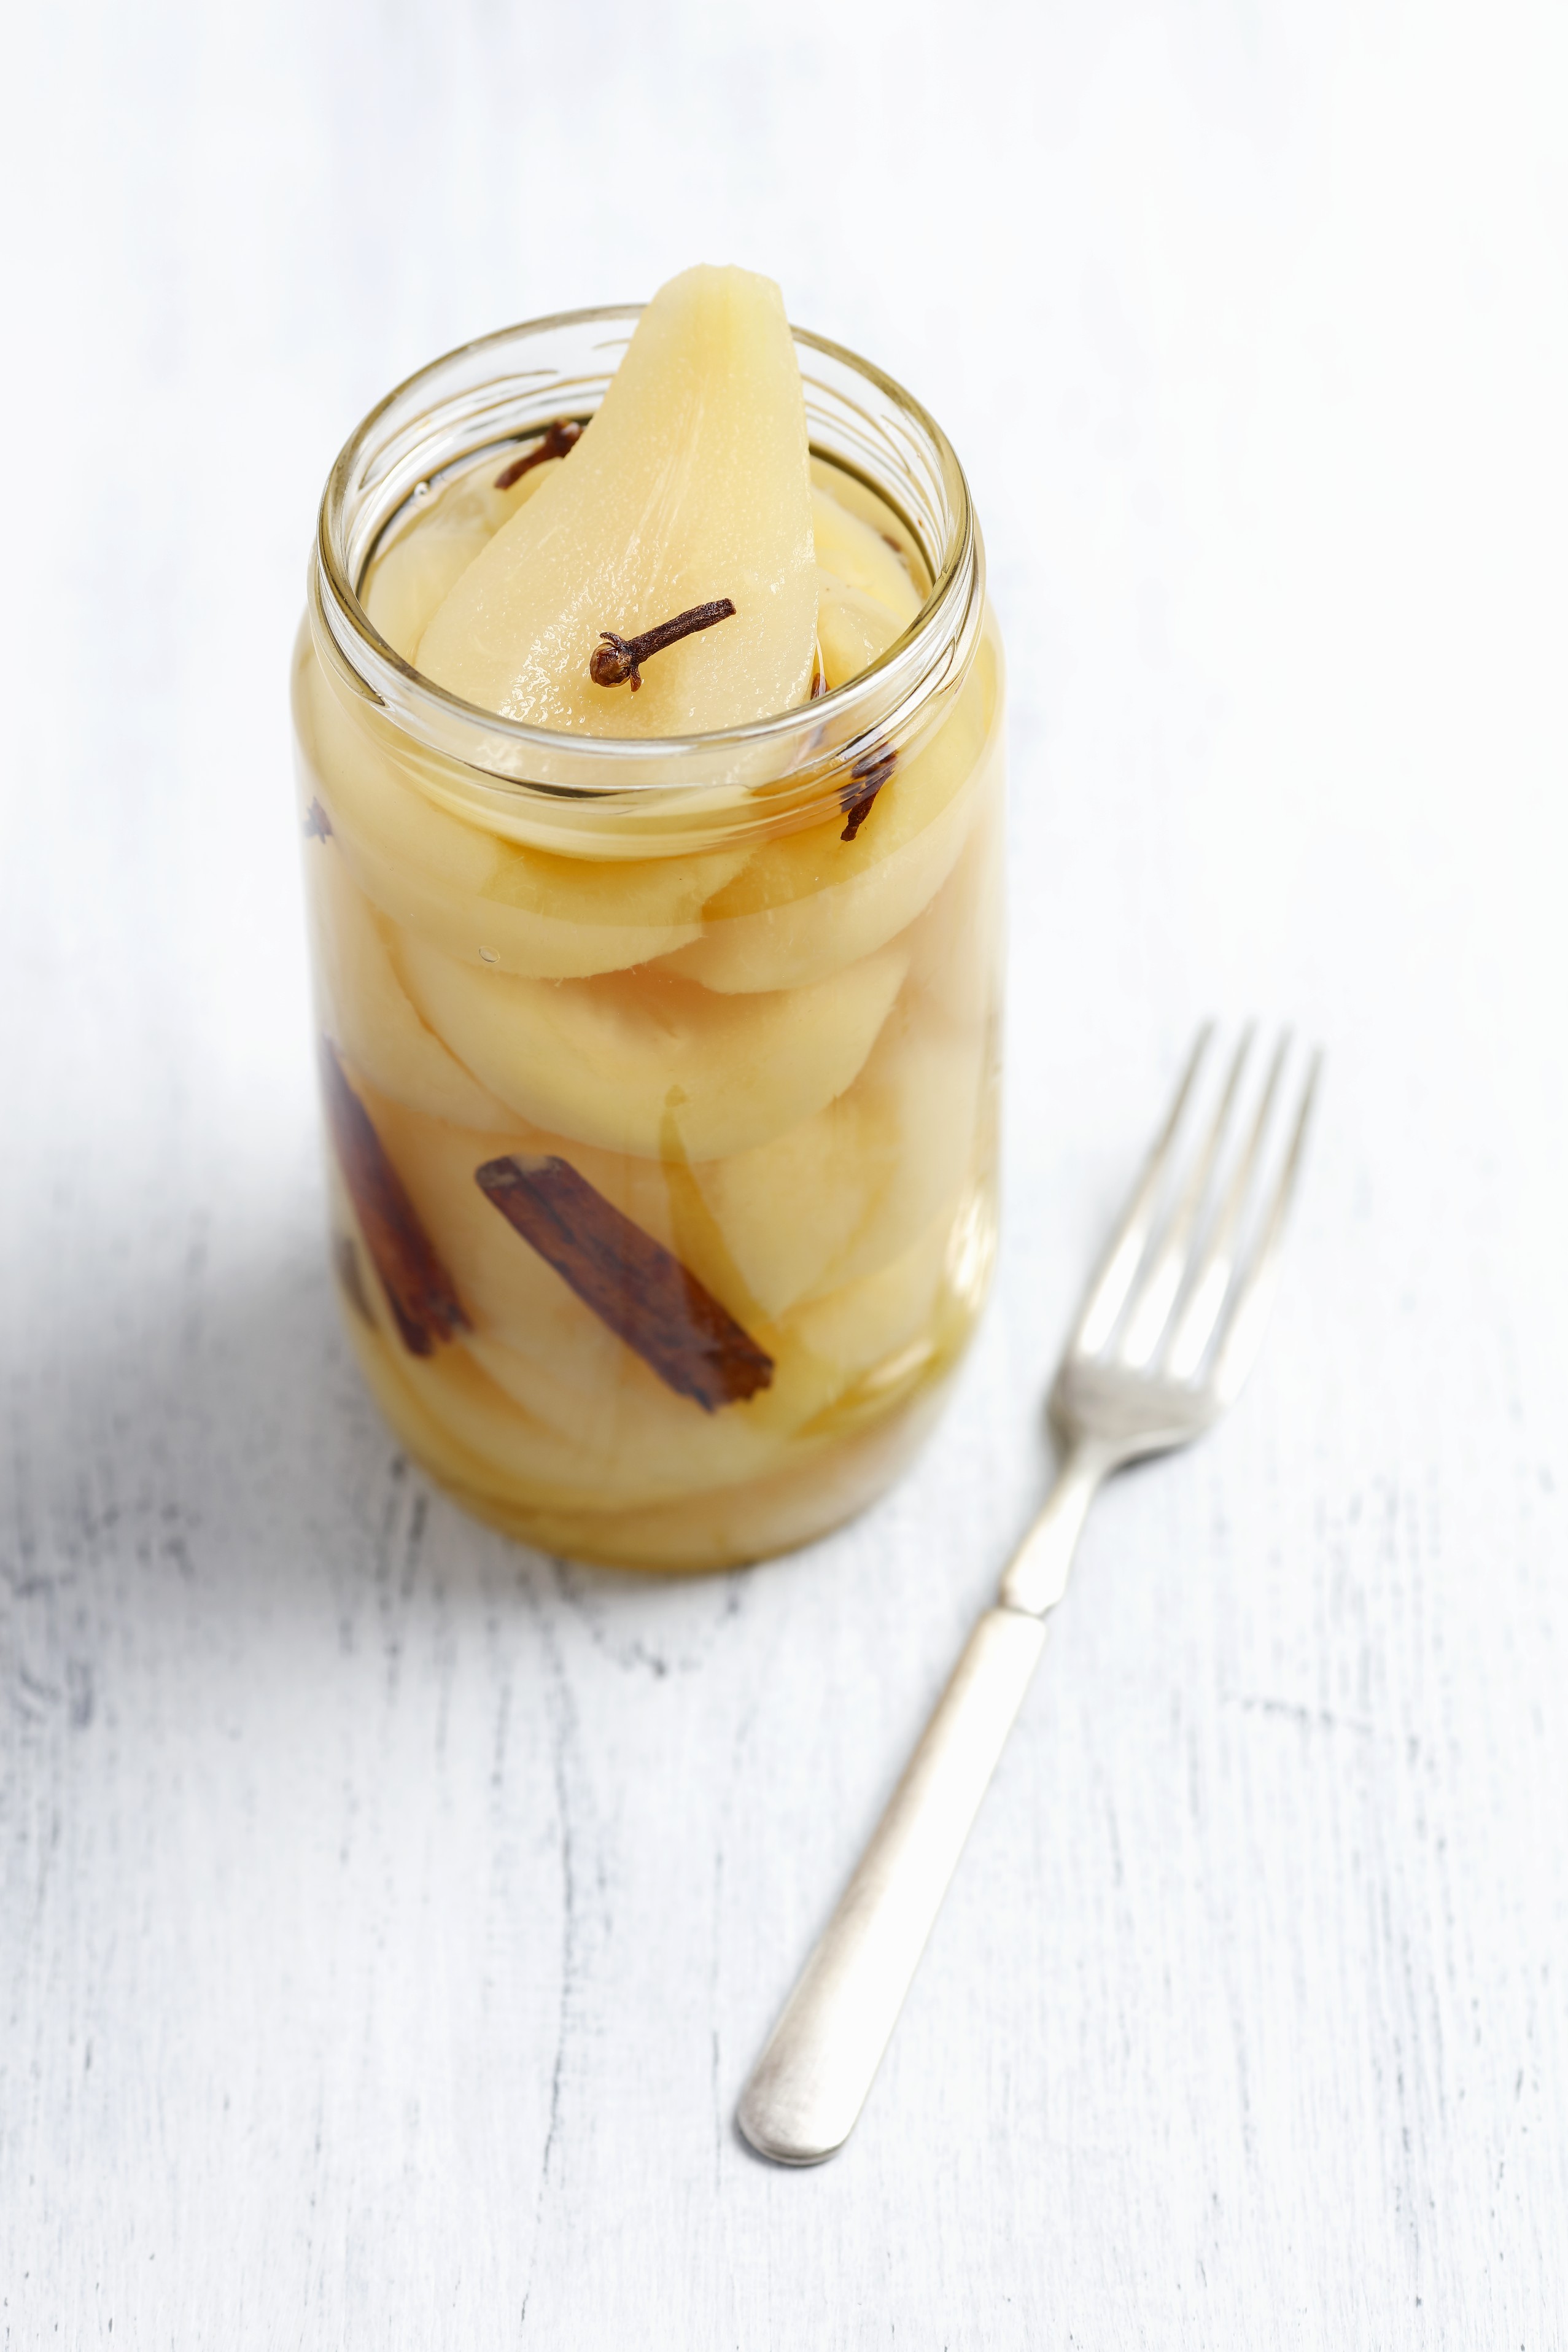 Pickling Syrups: Great for salads, sides & fillers